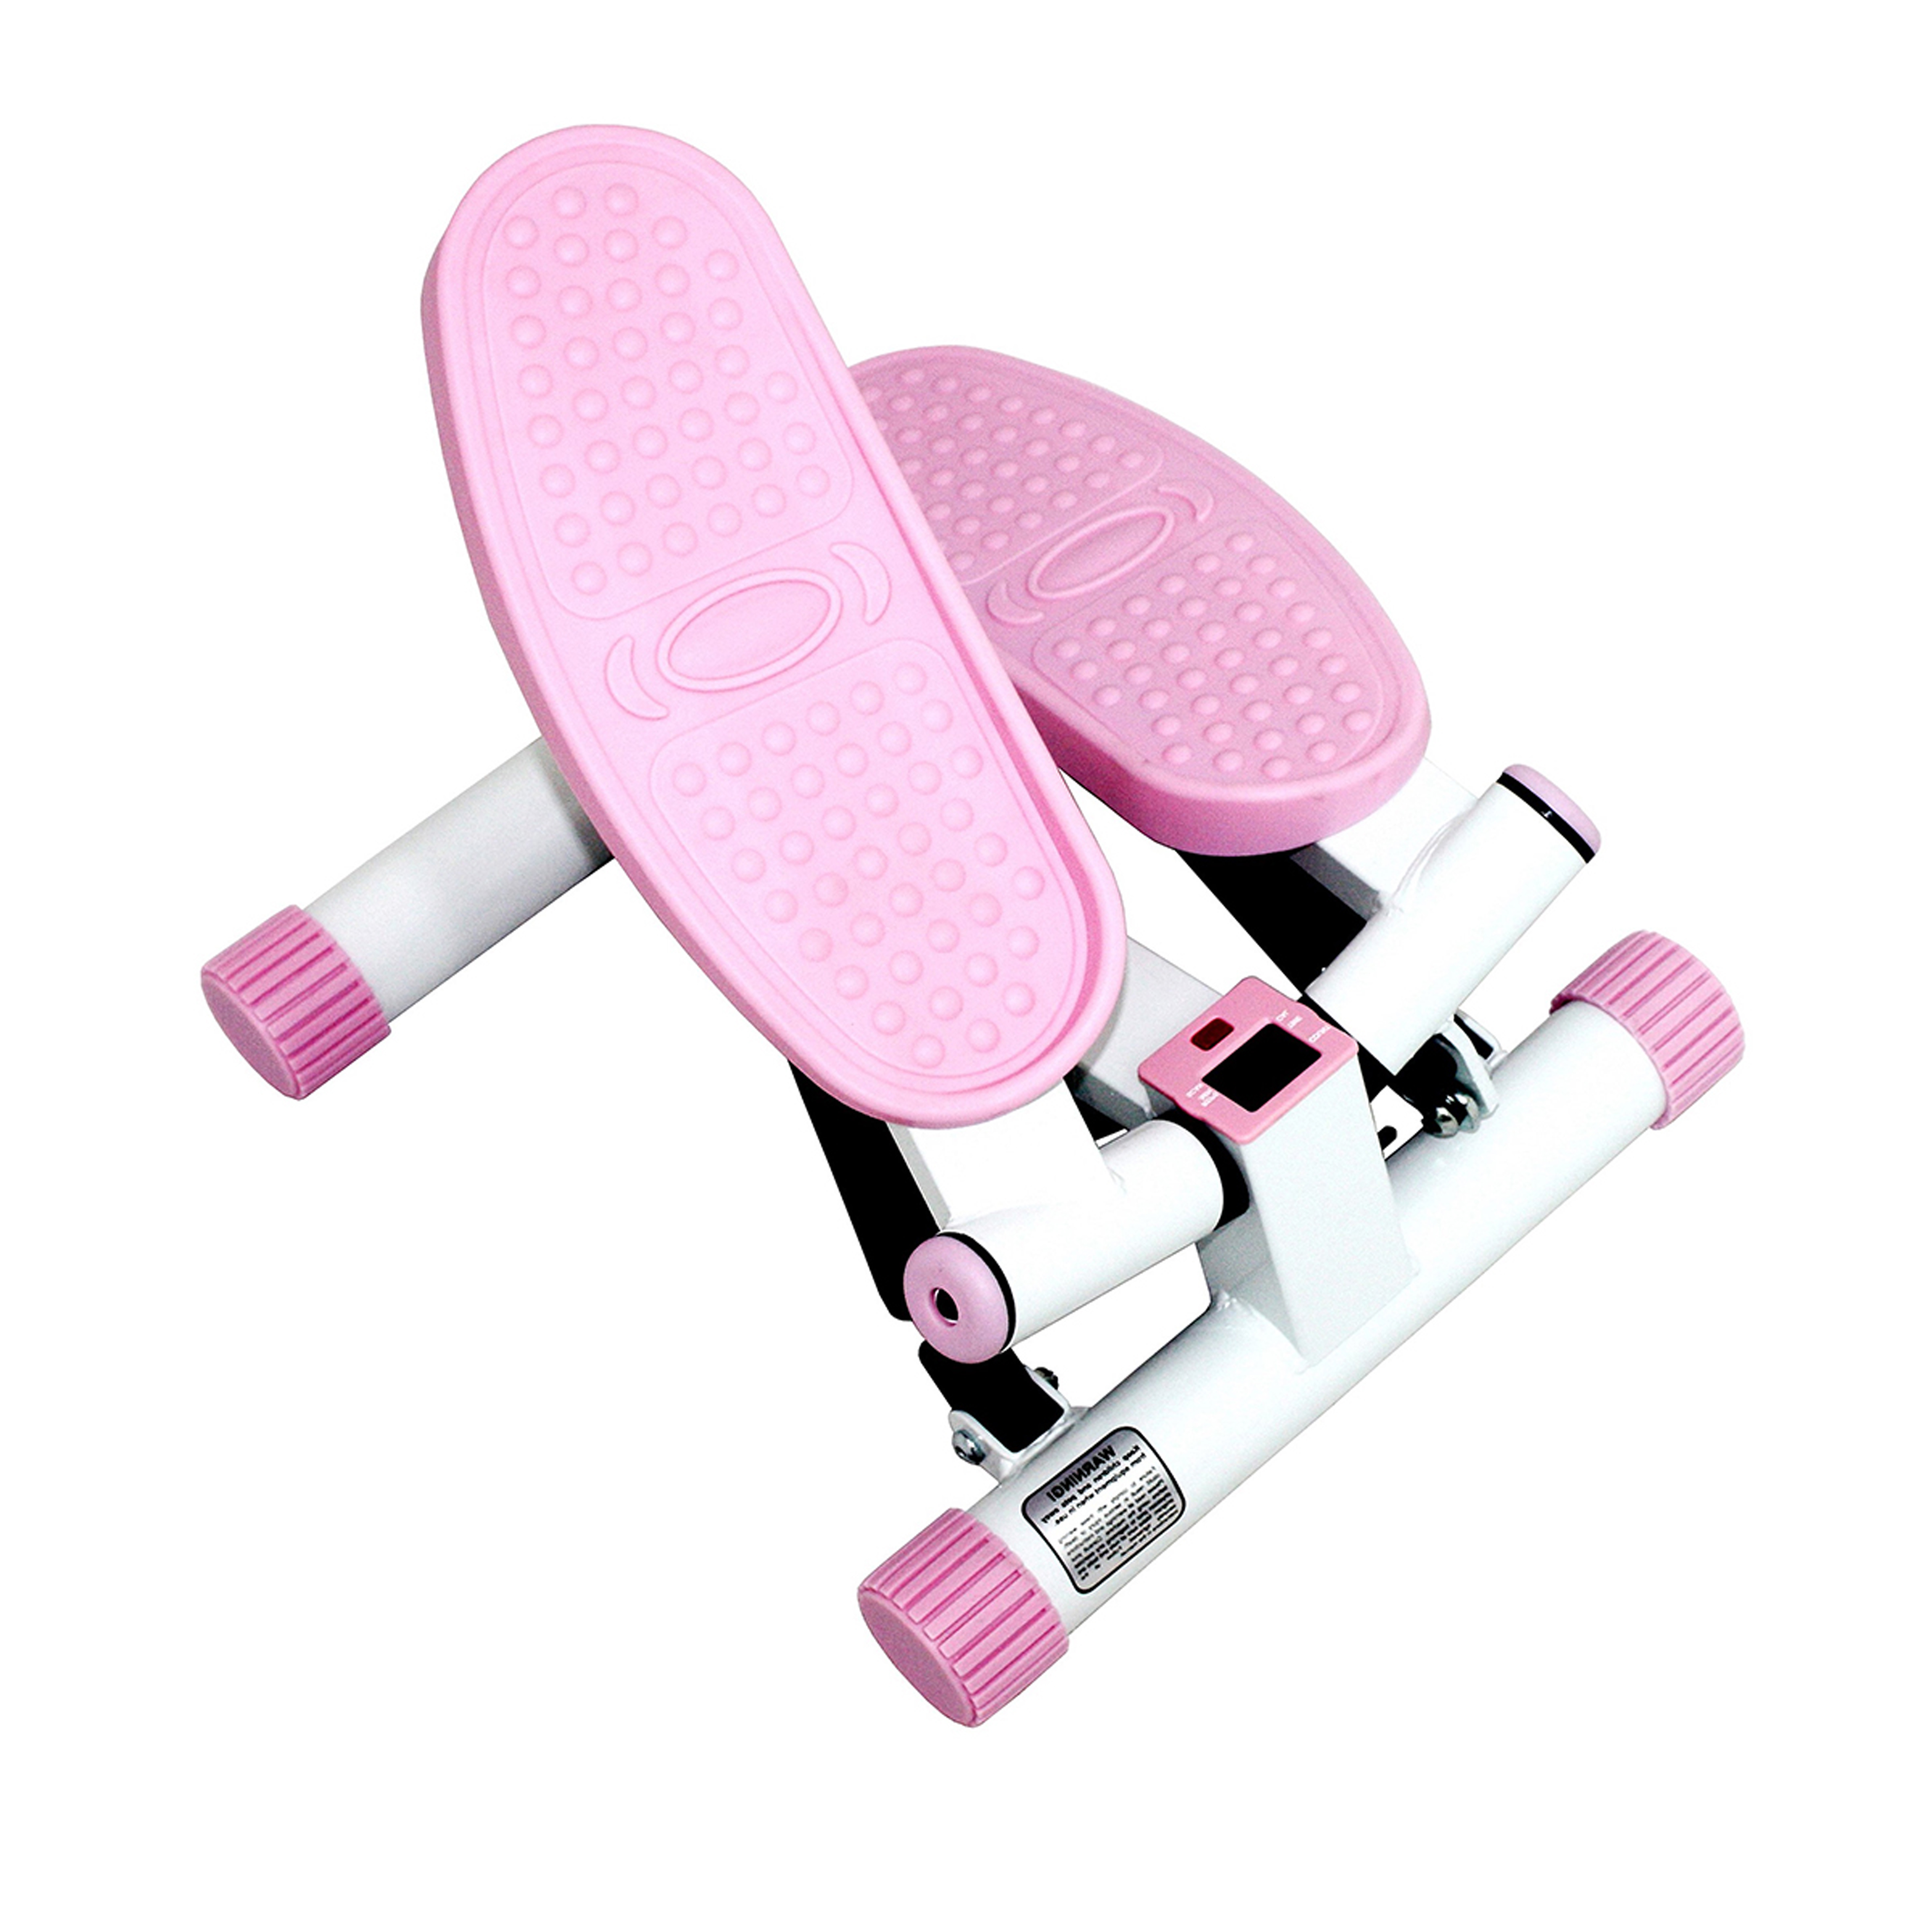 Sunny Health & Fitness Pink Adjustable Twist Stepper Machine w/ LCD Monitor - Mini Stair Stepper for at Home Exercise, P8000 - image 3 of 9